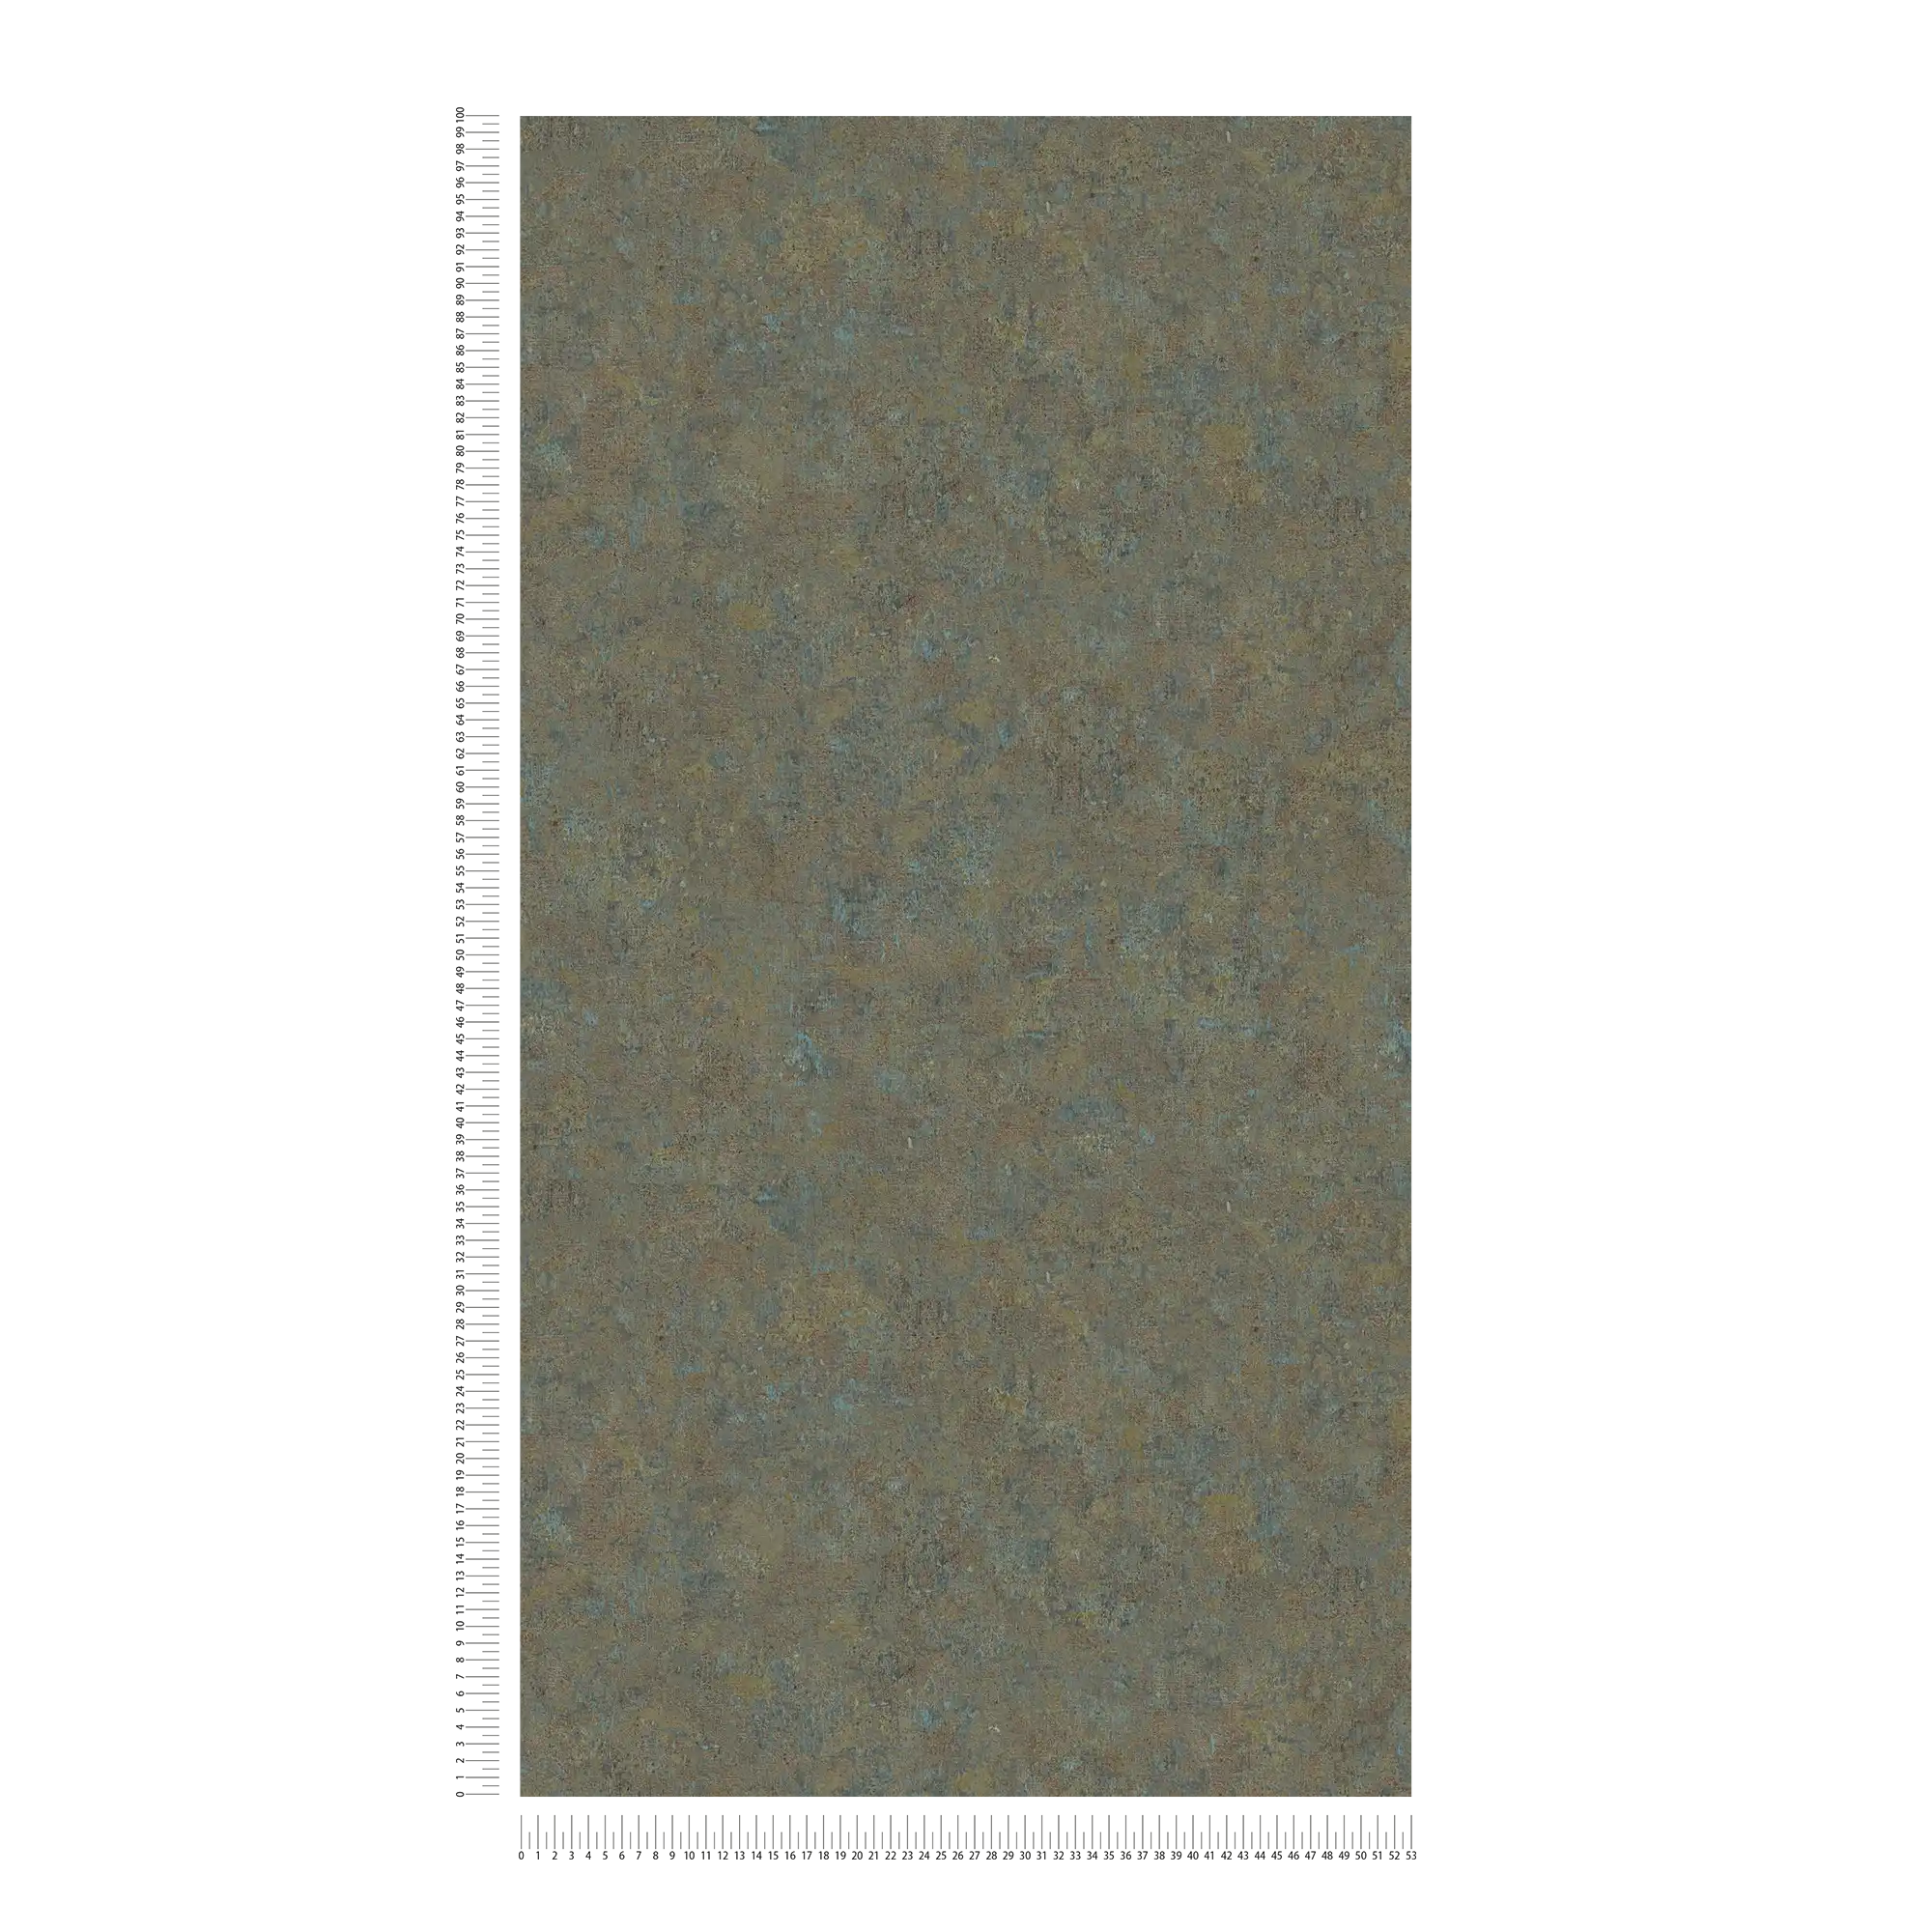             Plain wallpaper with colour hatching, vintage look - brown, green
        